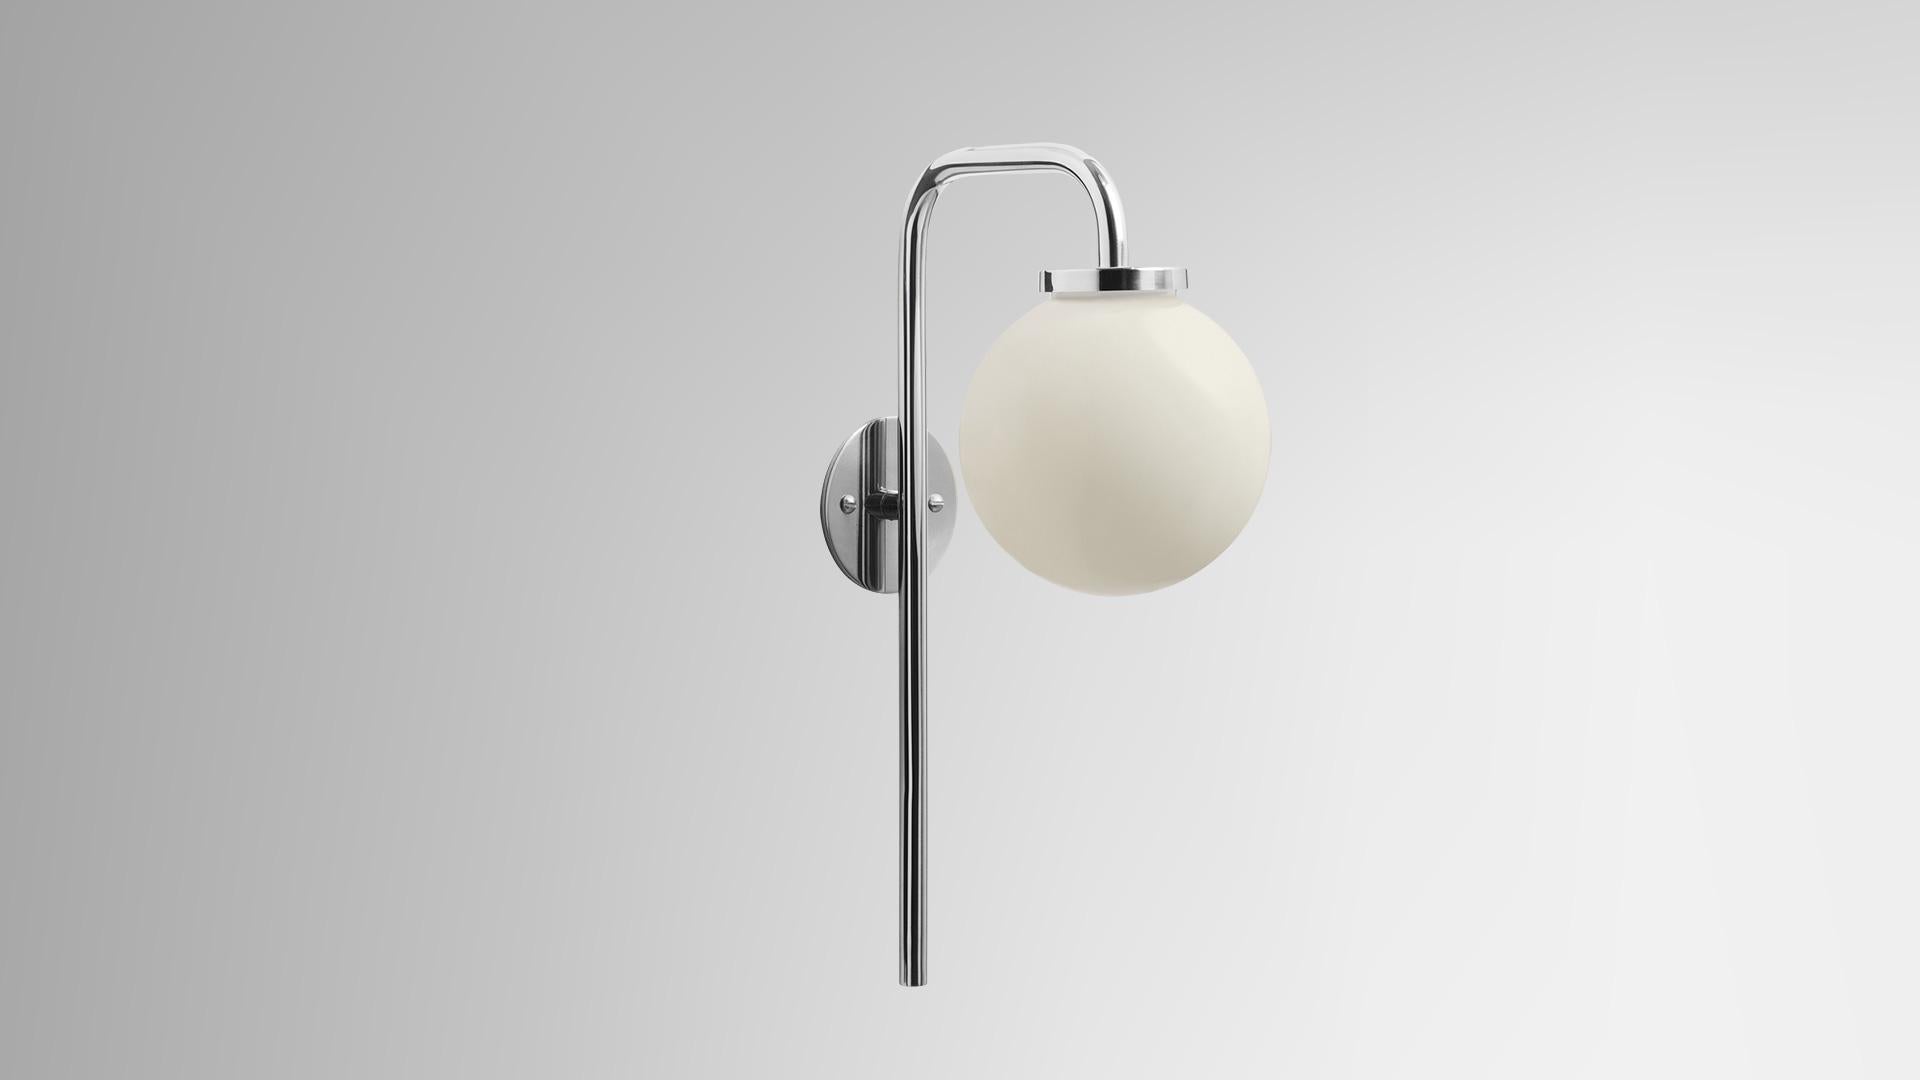 Opal big bulb wall lamp by CTO Lighting
Materials: polished nickel with opal glass shade
Dimensions: 20 x H 36 cm

All our lamps can be wired according to each country. If sold to the USA it will be wired for the USA for instance.

Also available in